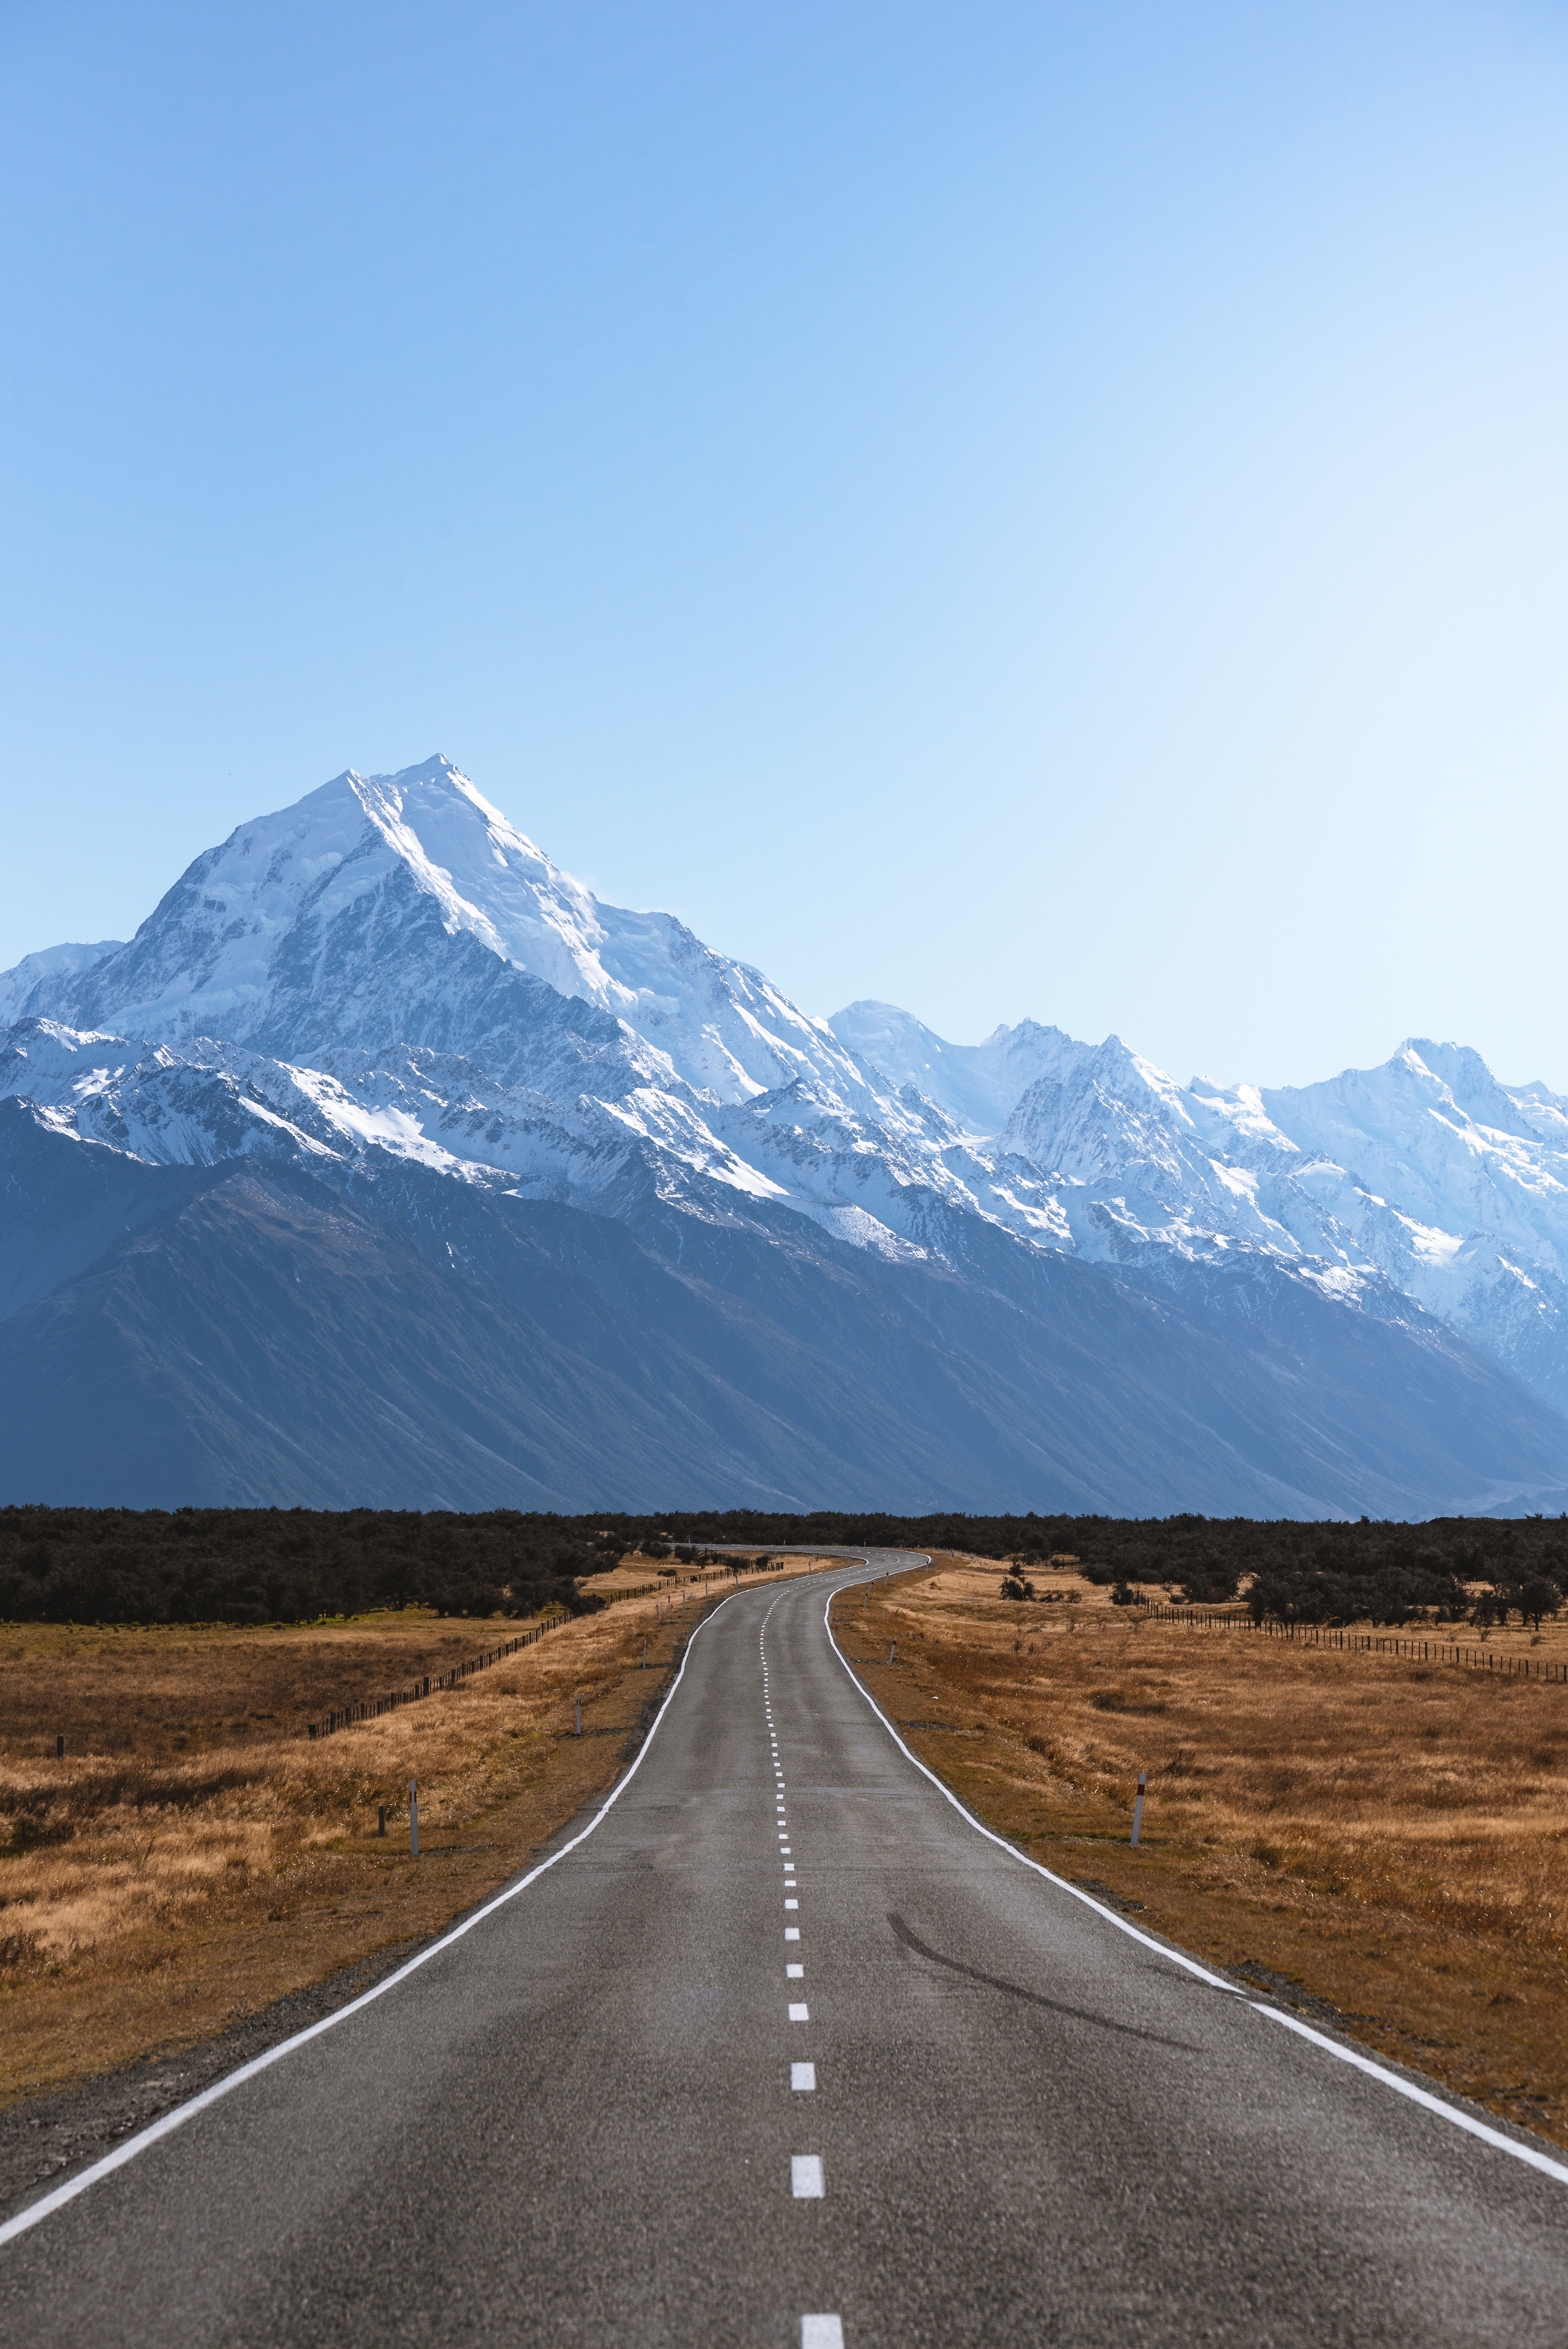 new zealand, markup, nature, mountains, road, mountain cook, mount cook